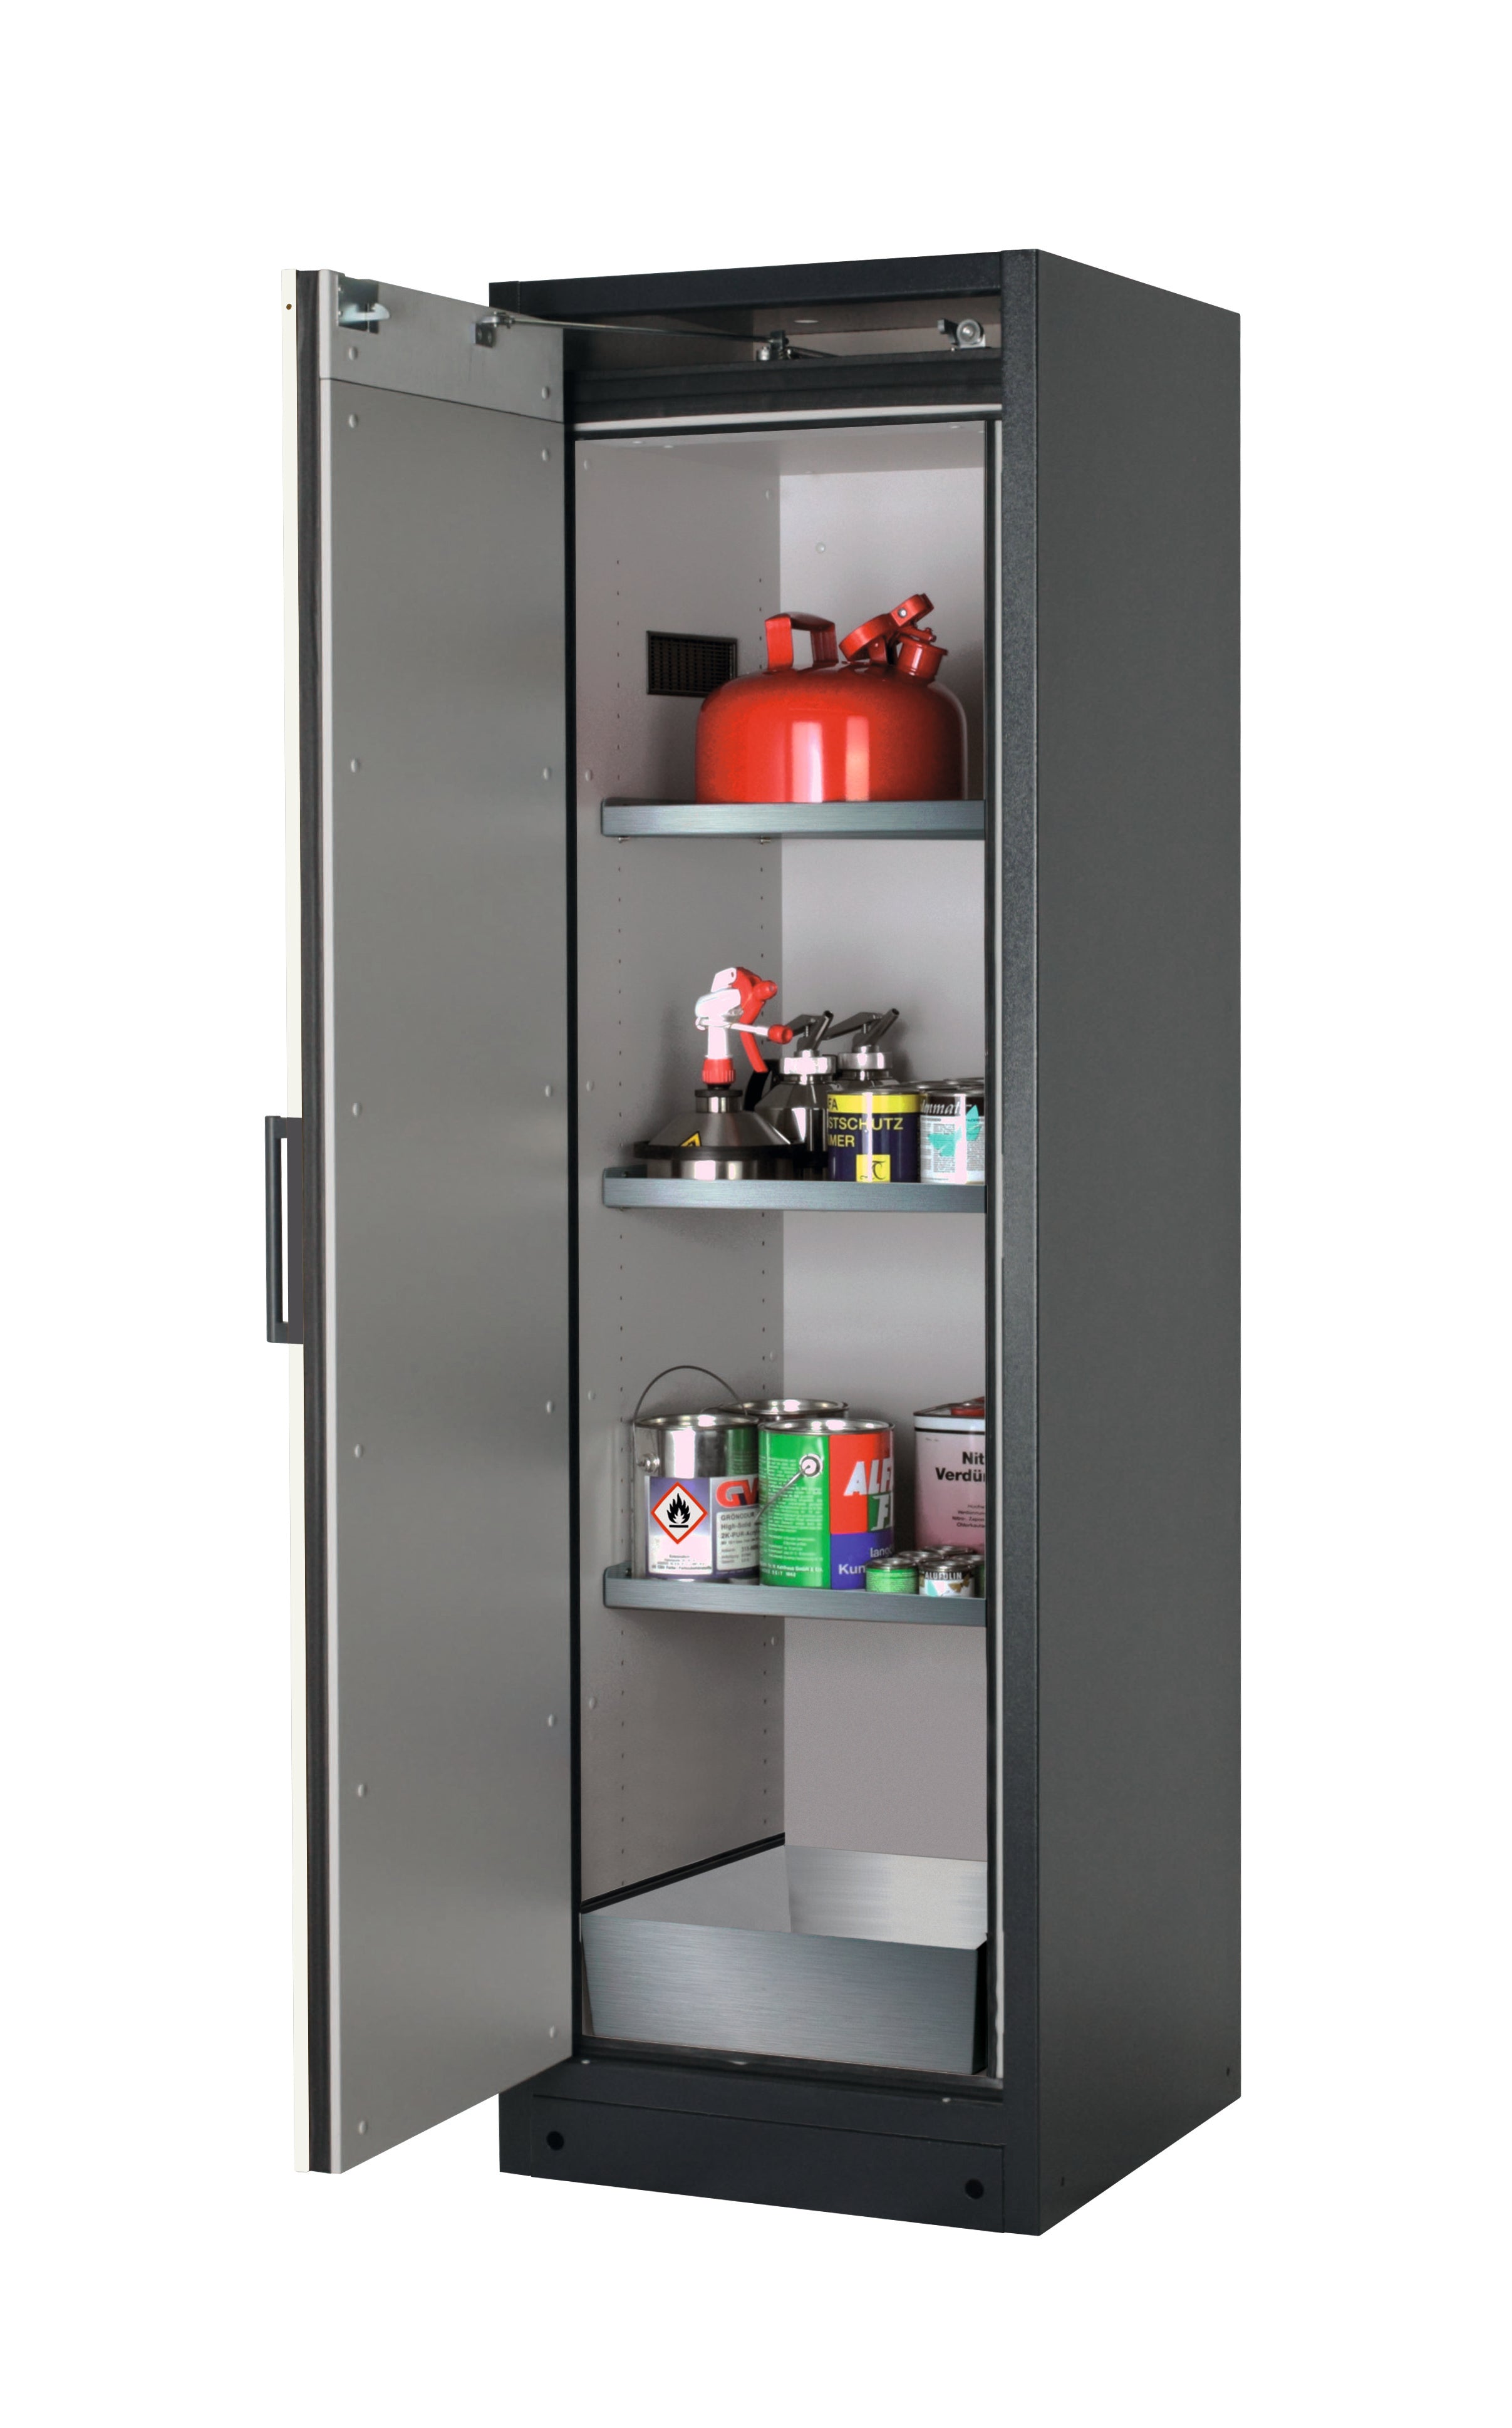 Type 90 safety storage cabinet Q-CLASSIC-90 model Q90.195.060 in asecos silver with 3x shelf standard (stainless steel 1.4301),